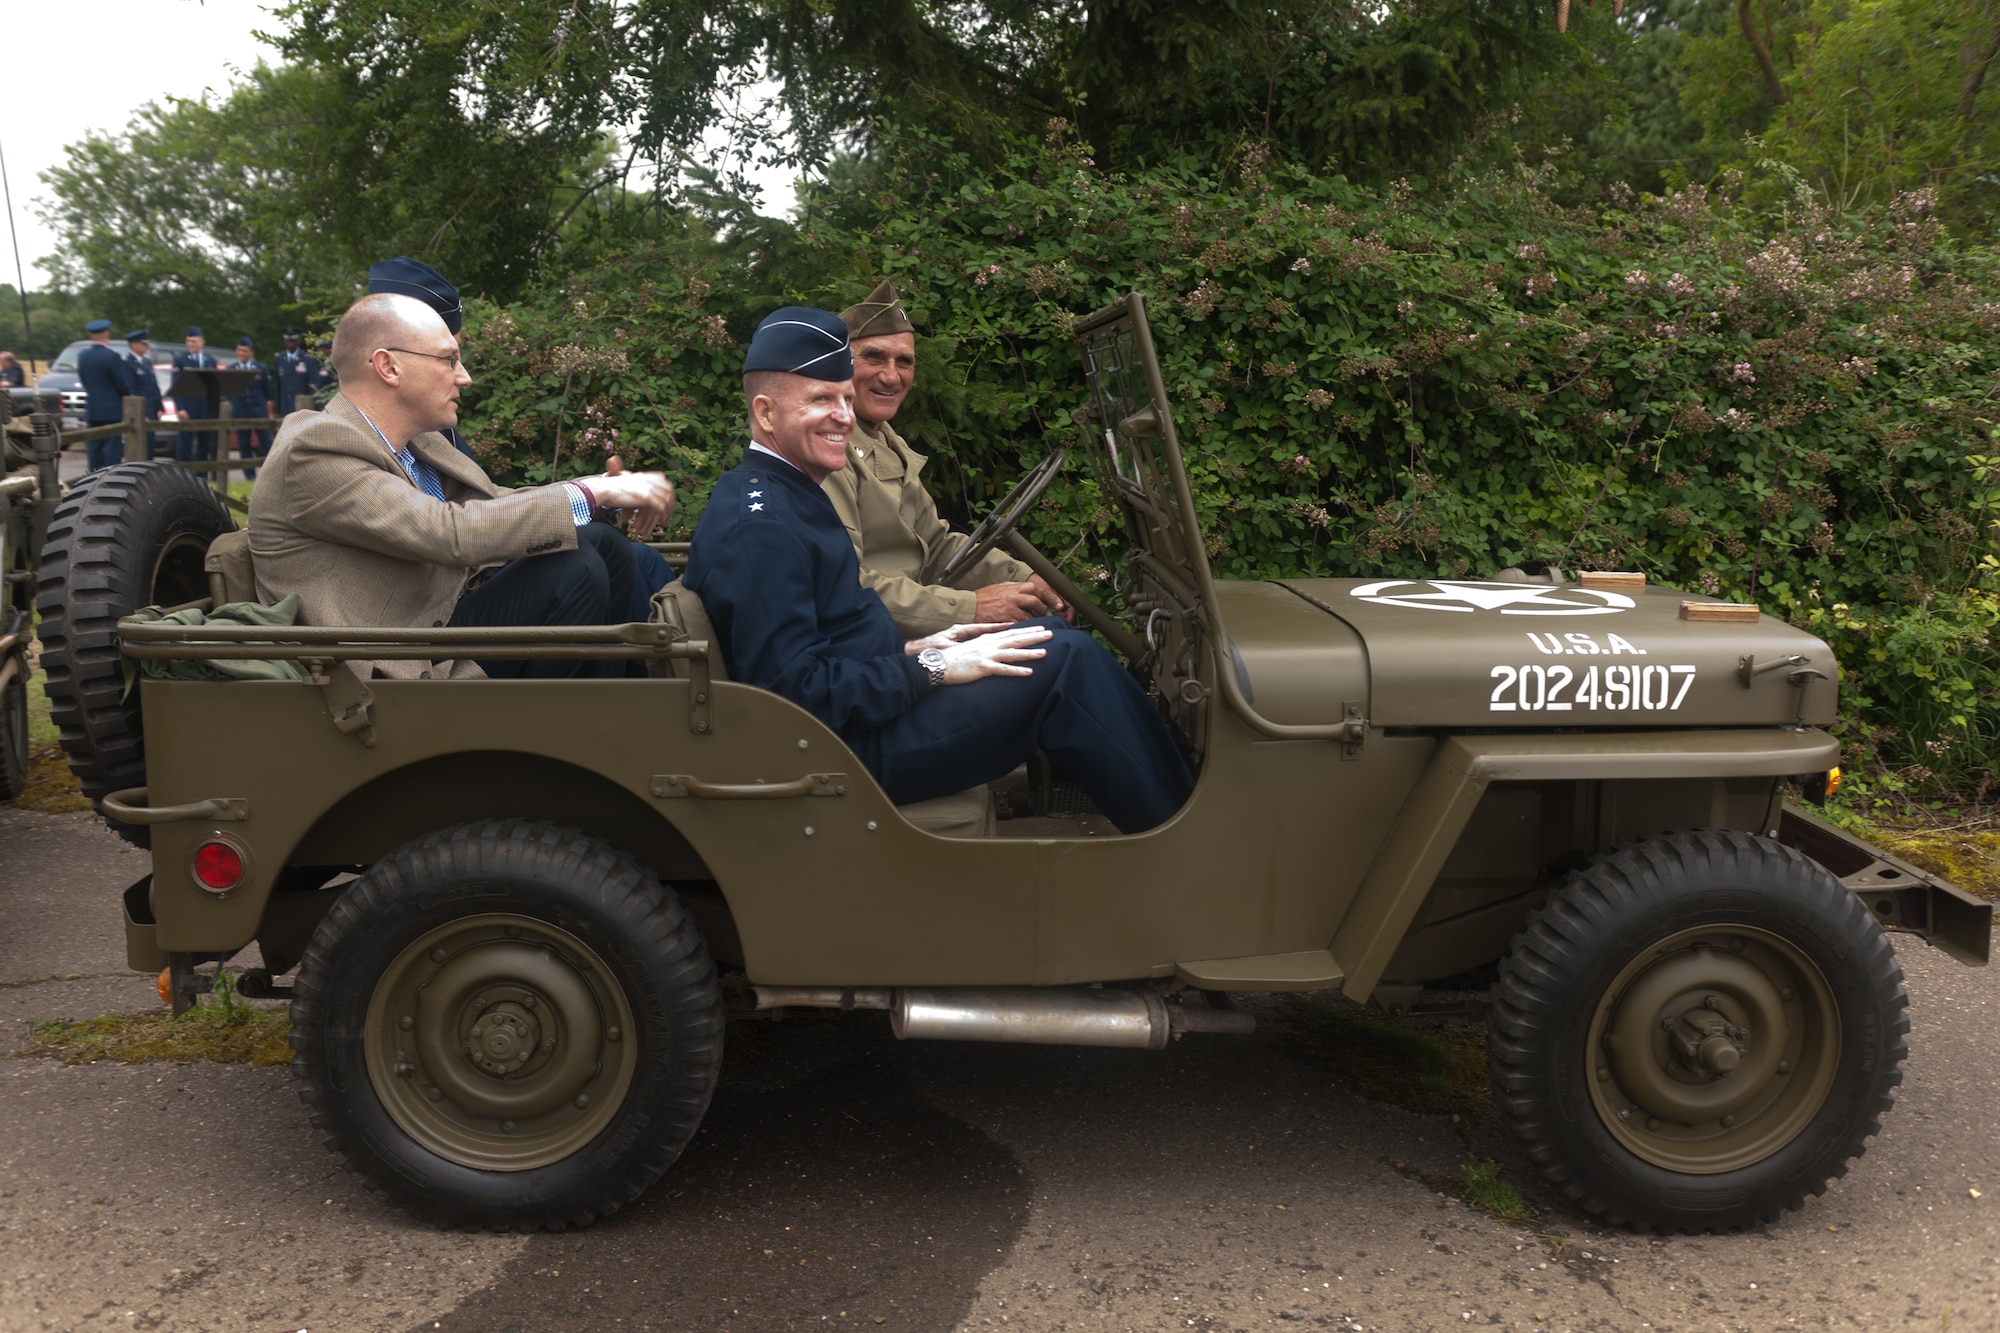 GRAFTON UNDERWOOD, United Kingdom – Maj. Gen. Stephen Wilson, Eighth Air Force commander, prepares to tour Grafton Underwood after a memorial service was held near old Eighth Air Force airfield Aug. 17. The day marked the 70th anniversary of the first Eighth Air Force bombers, from the 97th Bombardment Group (Heavy), participating in World War II which launched from Grafton Underwood. Col. Frank Armstrong, 97th BG commander, and the 340th Bomb Squadron commander Maj. Paul Tibbets (who later flew the Enola Gay to Hiroshima, Japan, on the first atomic bomb mission) piloted the lead aircraft of the group, Butcher Shop. In the leading aircraft of the second flight, Yankee Doodle, flew Gen. Ira C. Eaker, the commanding general of the VIII Bomber Command. (U.S. Air Force photo by Staff Sgt. Brian Stives)